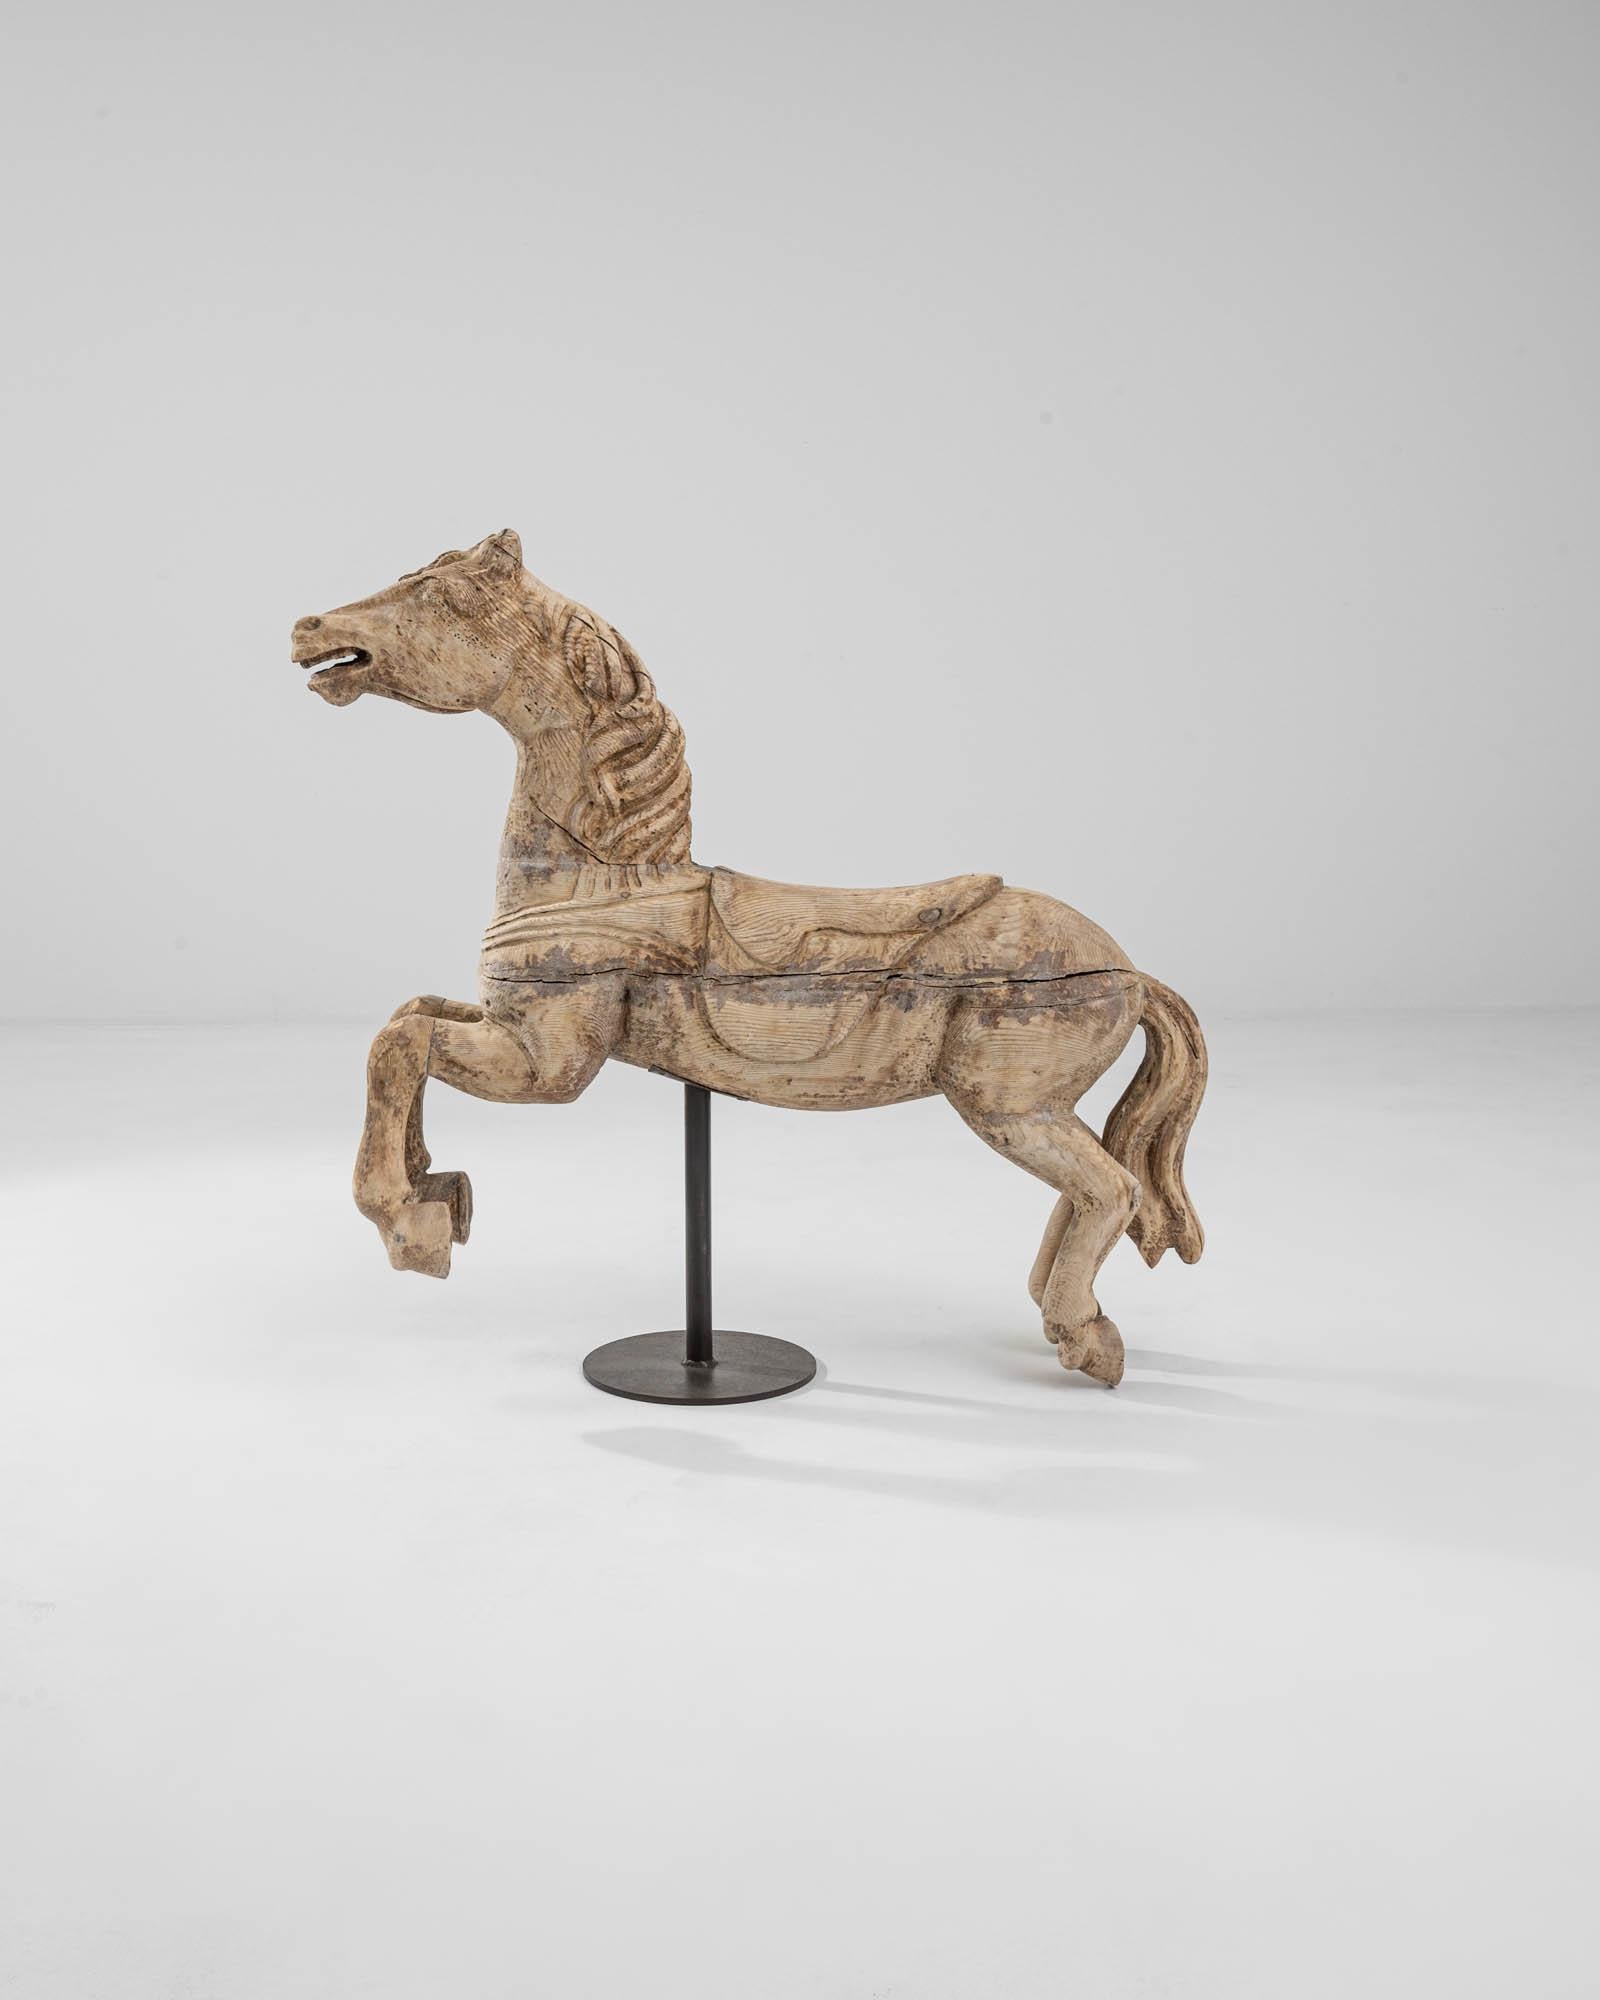 A wooden sculpture of a horse from 19th century France. Captured mid-gallop, this bounding horse vibrates with charismatic energy. The grain of the wood runs like striae of hair along its body, creating the sensation of the wind blowing through it.